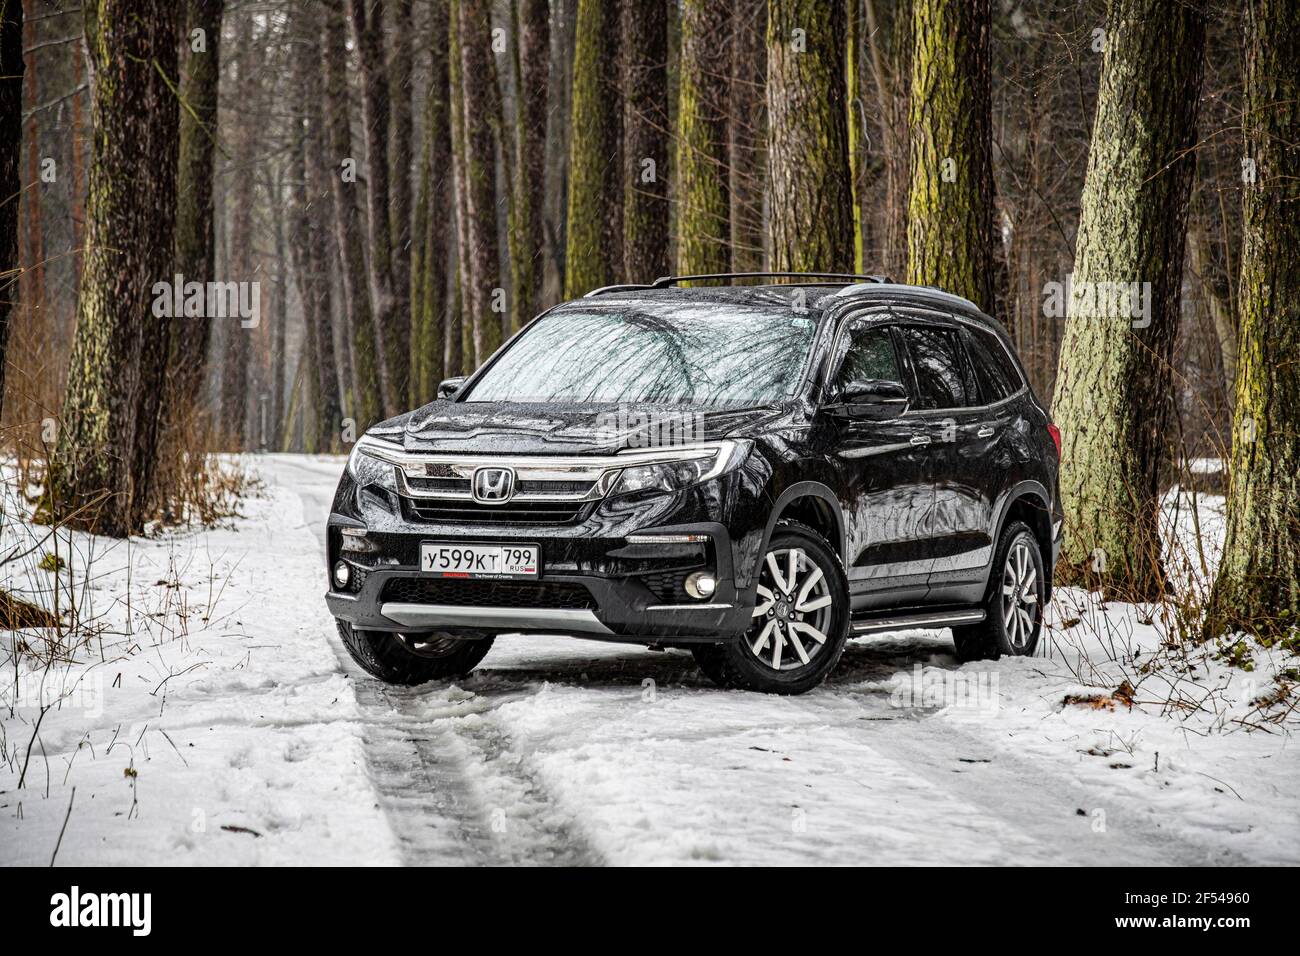 Moscow, Russia - February 2, 2020: Exterior of the new premium SUV Honda Pilot in winter forest landscape Stock Photo